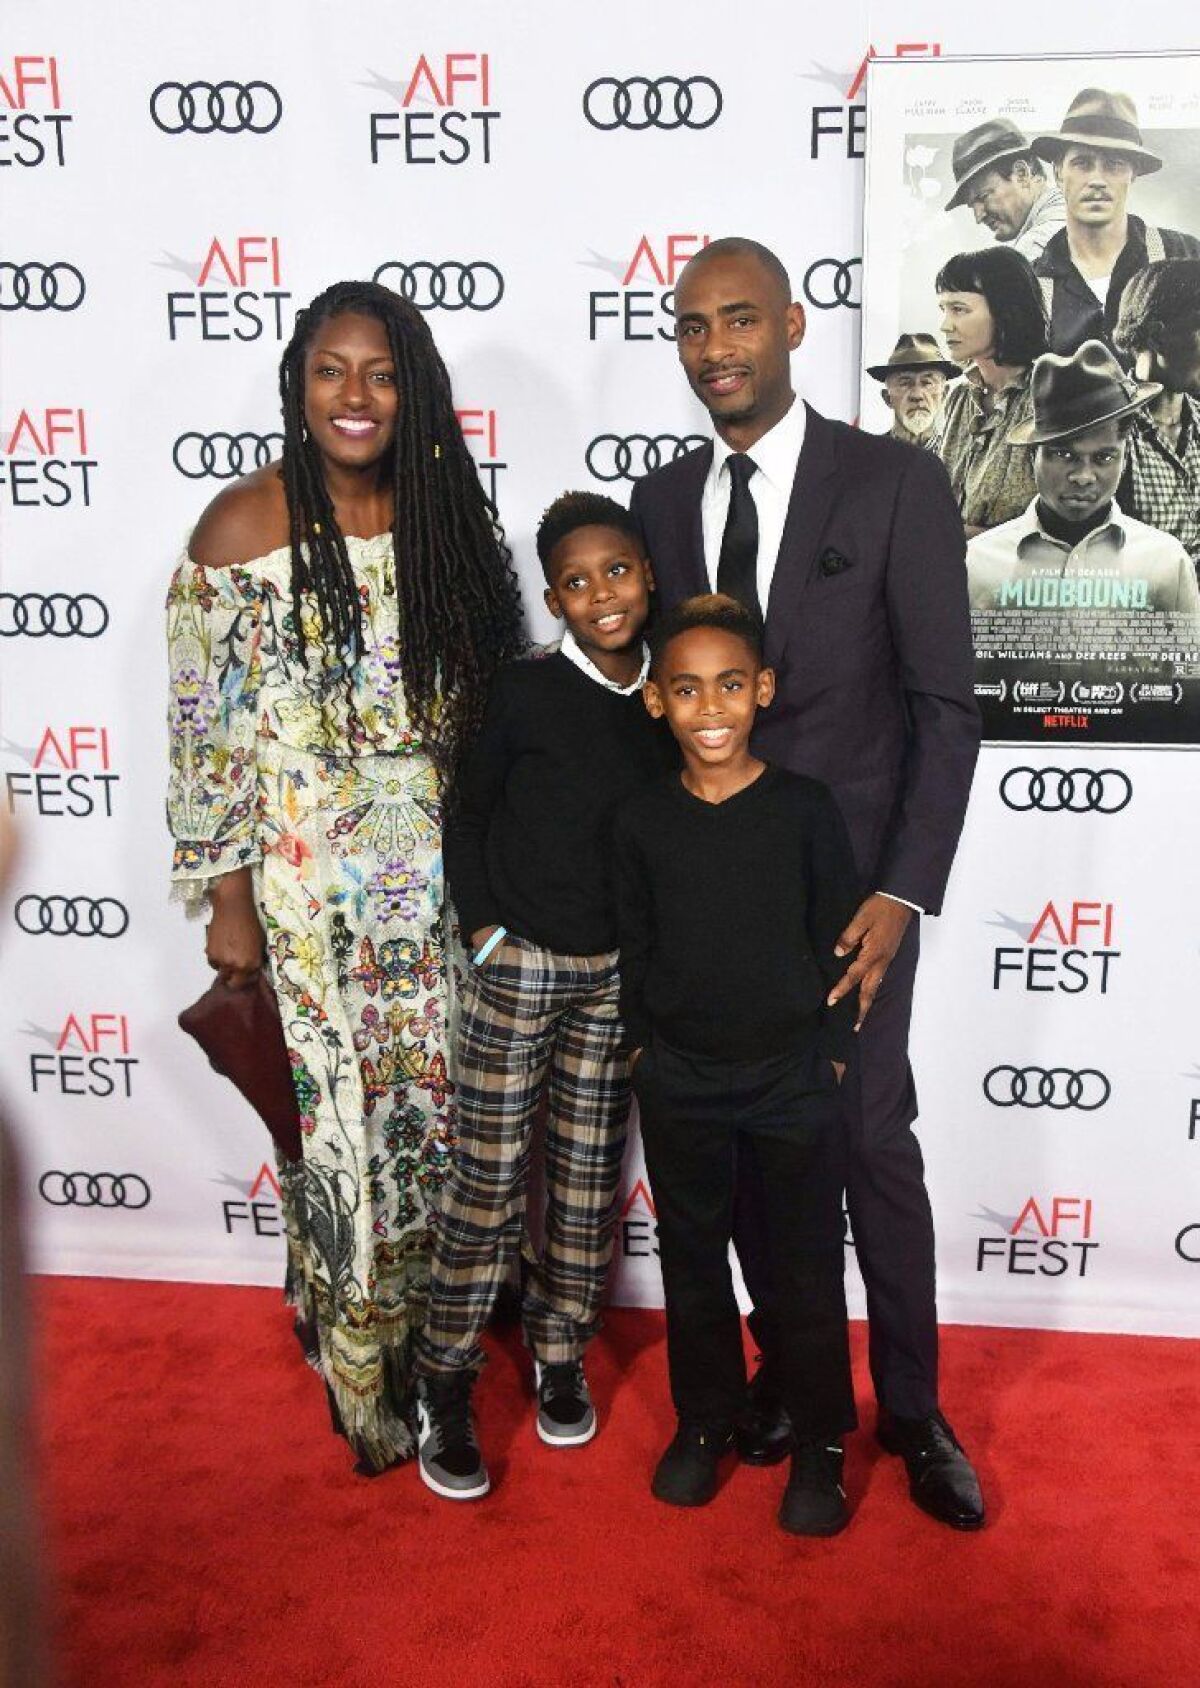 Charles D. arrives with family for the AFI Fest 2017 special opening night gala presentation of "Mudbound."